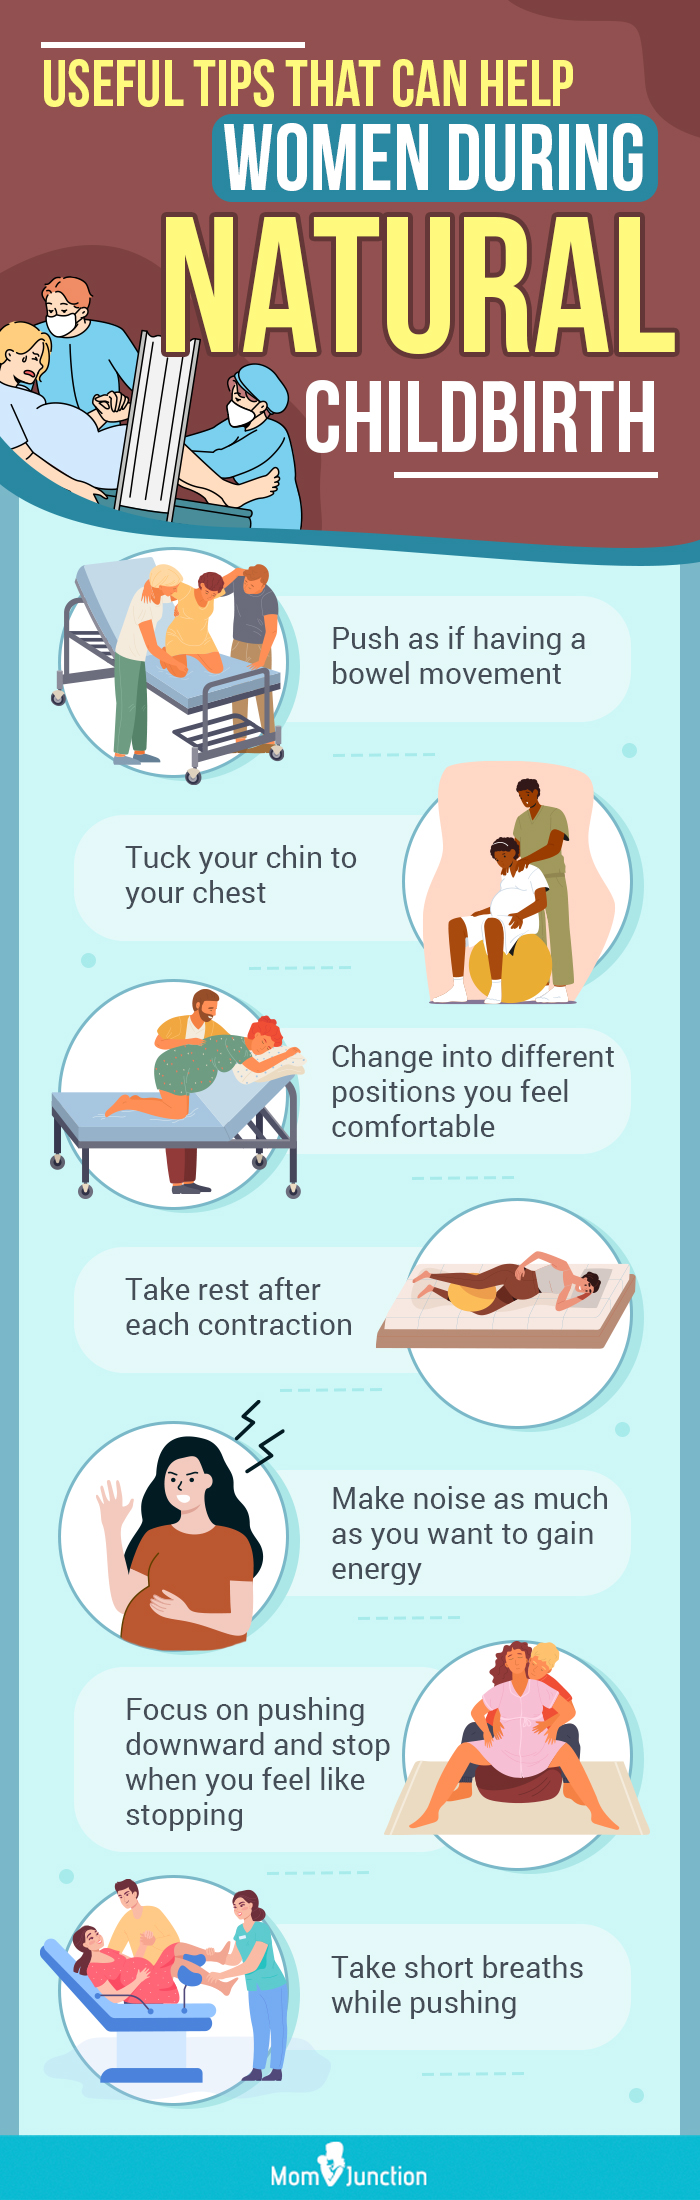 useful tips that can help women during natural childbirth (infographic)